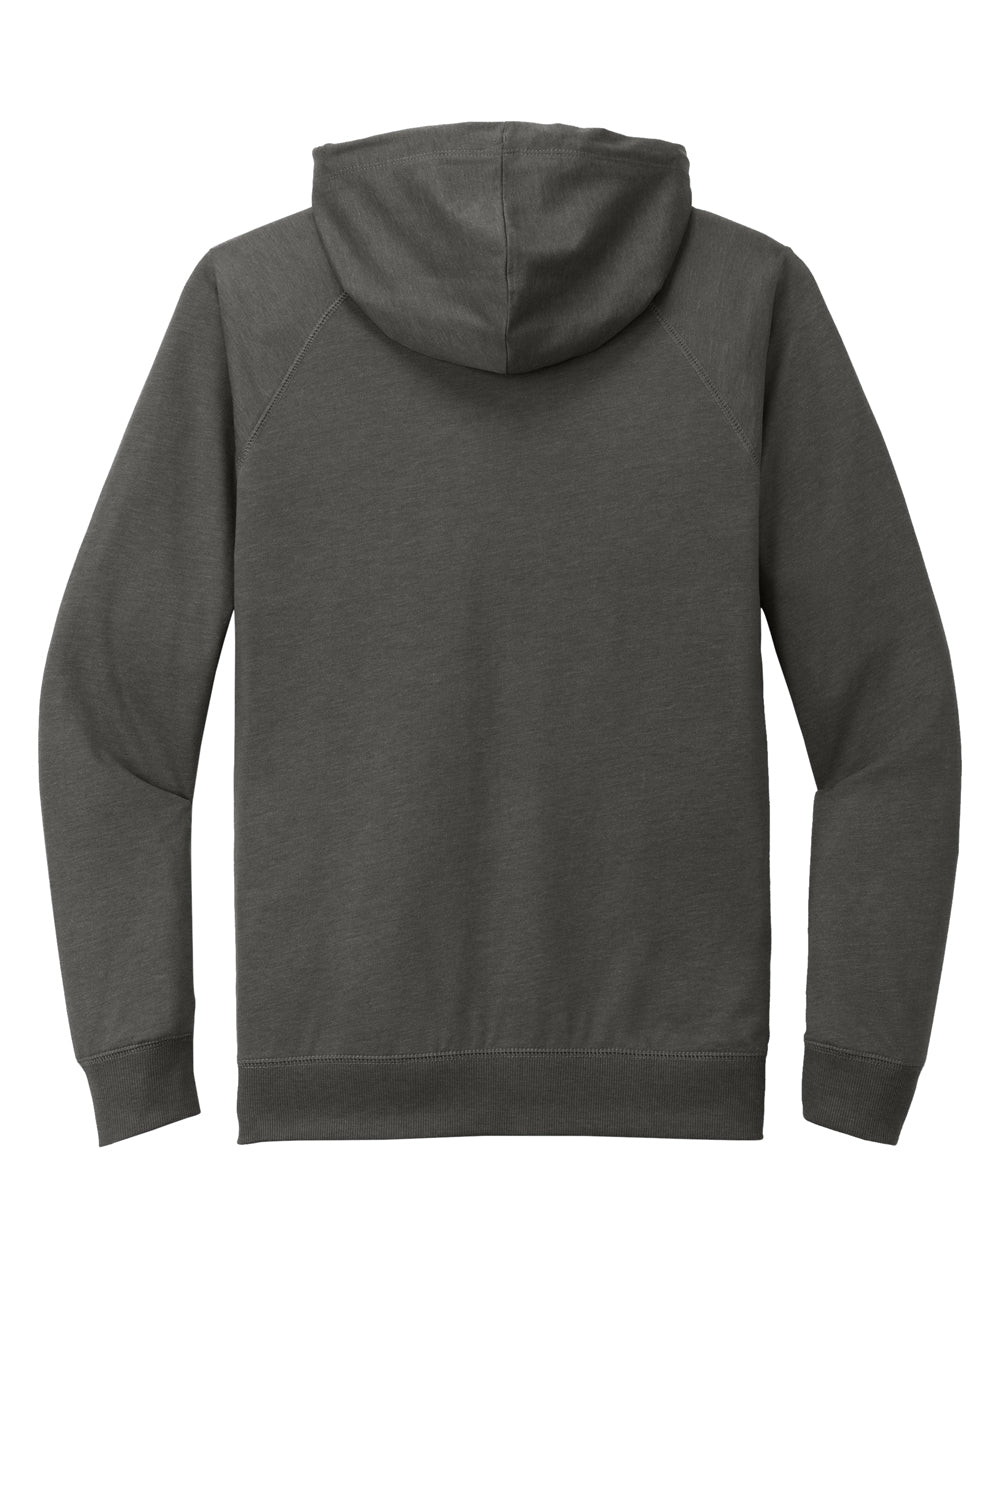 District Mens French Terry Full Zip Hooded Sweatshirt Hoodie Washed Coal Grey Flat Back